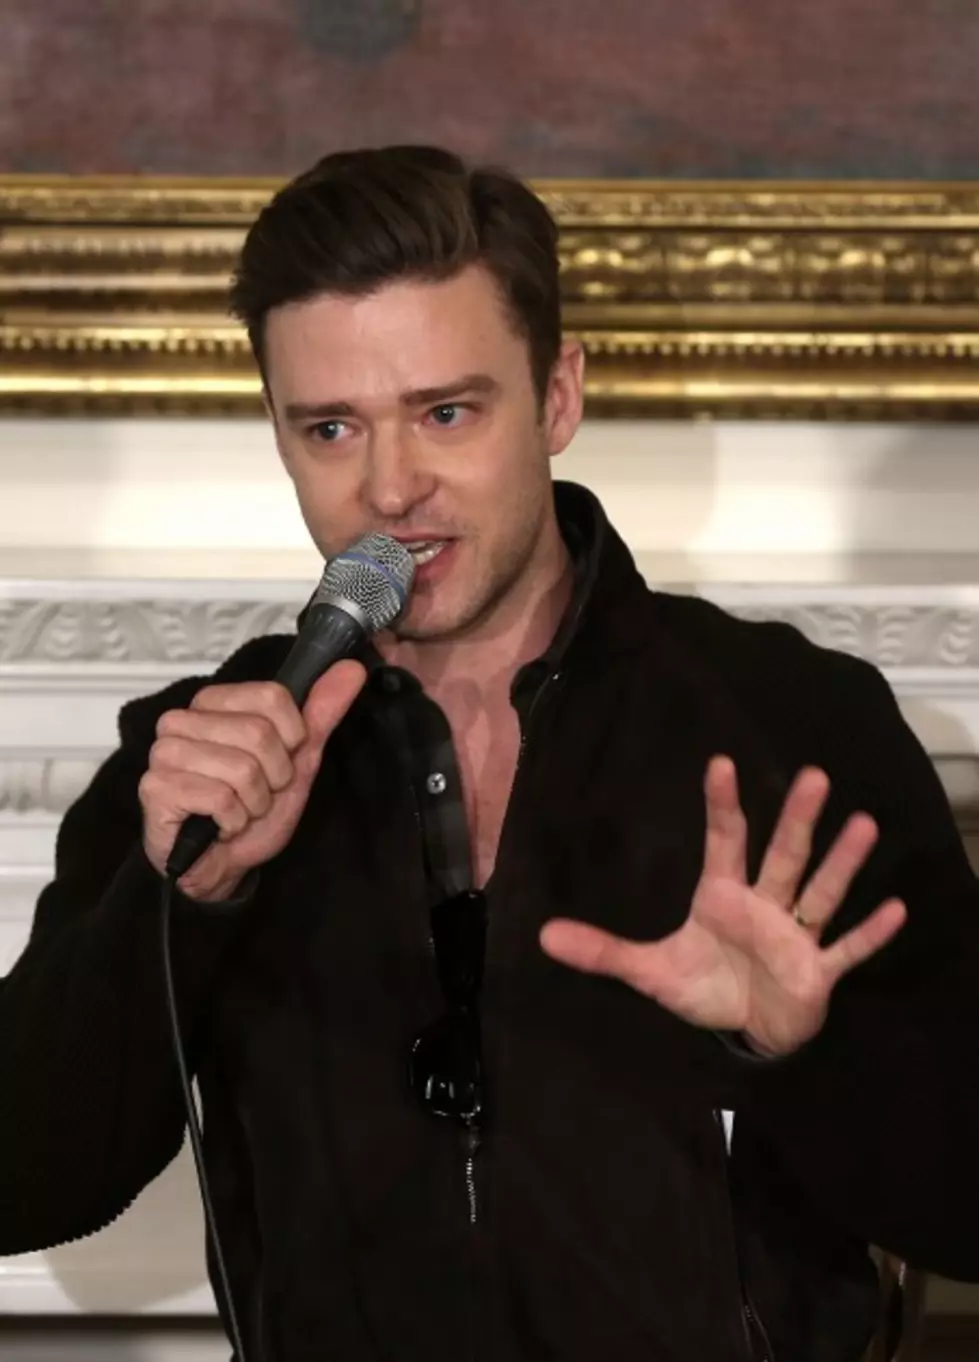 Justin Timberlake Wednesday Song Of The Day [Video]